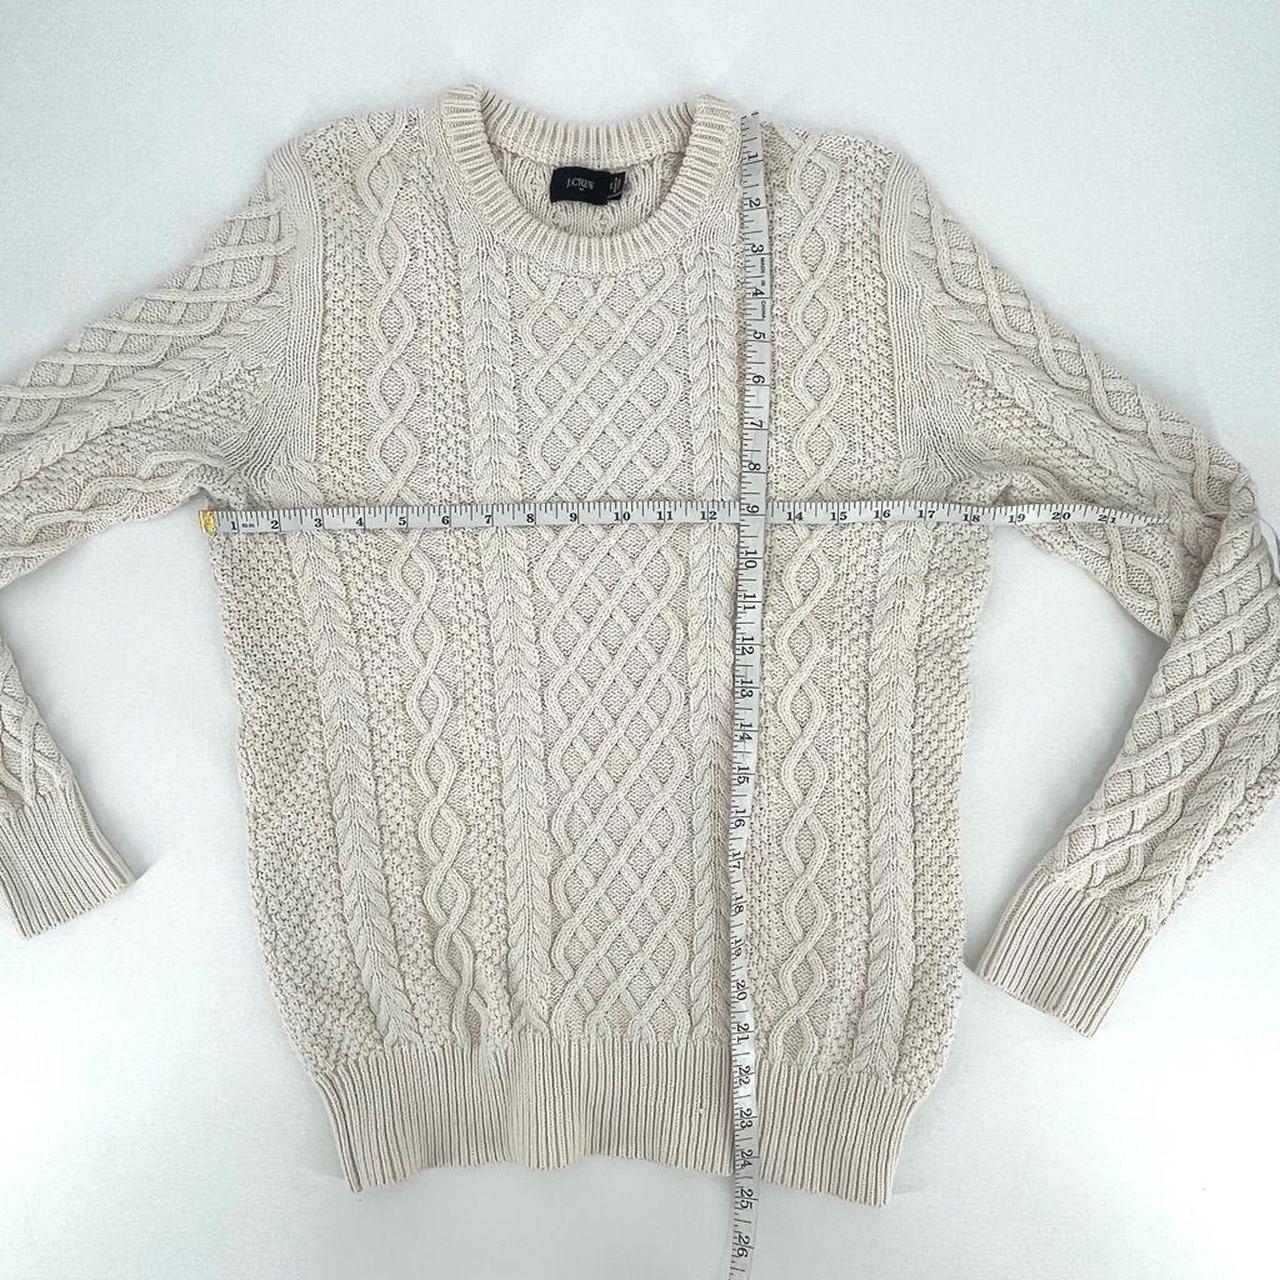 J. Crew Cream Cable Knit Sequin Sweater, Size XL